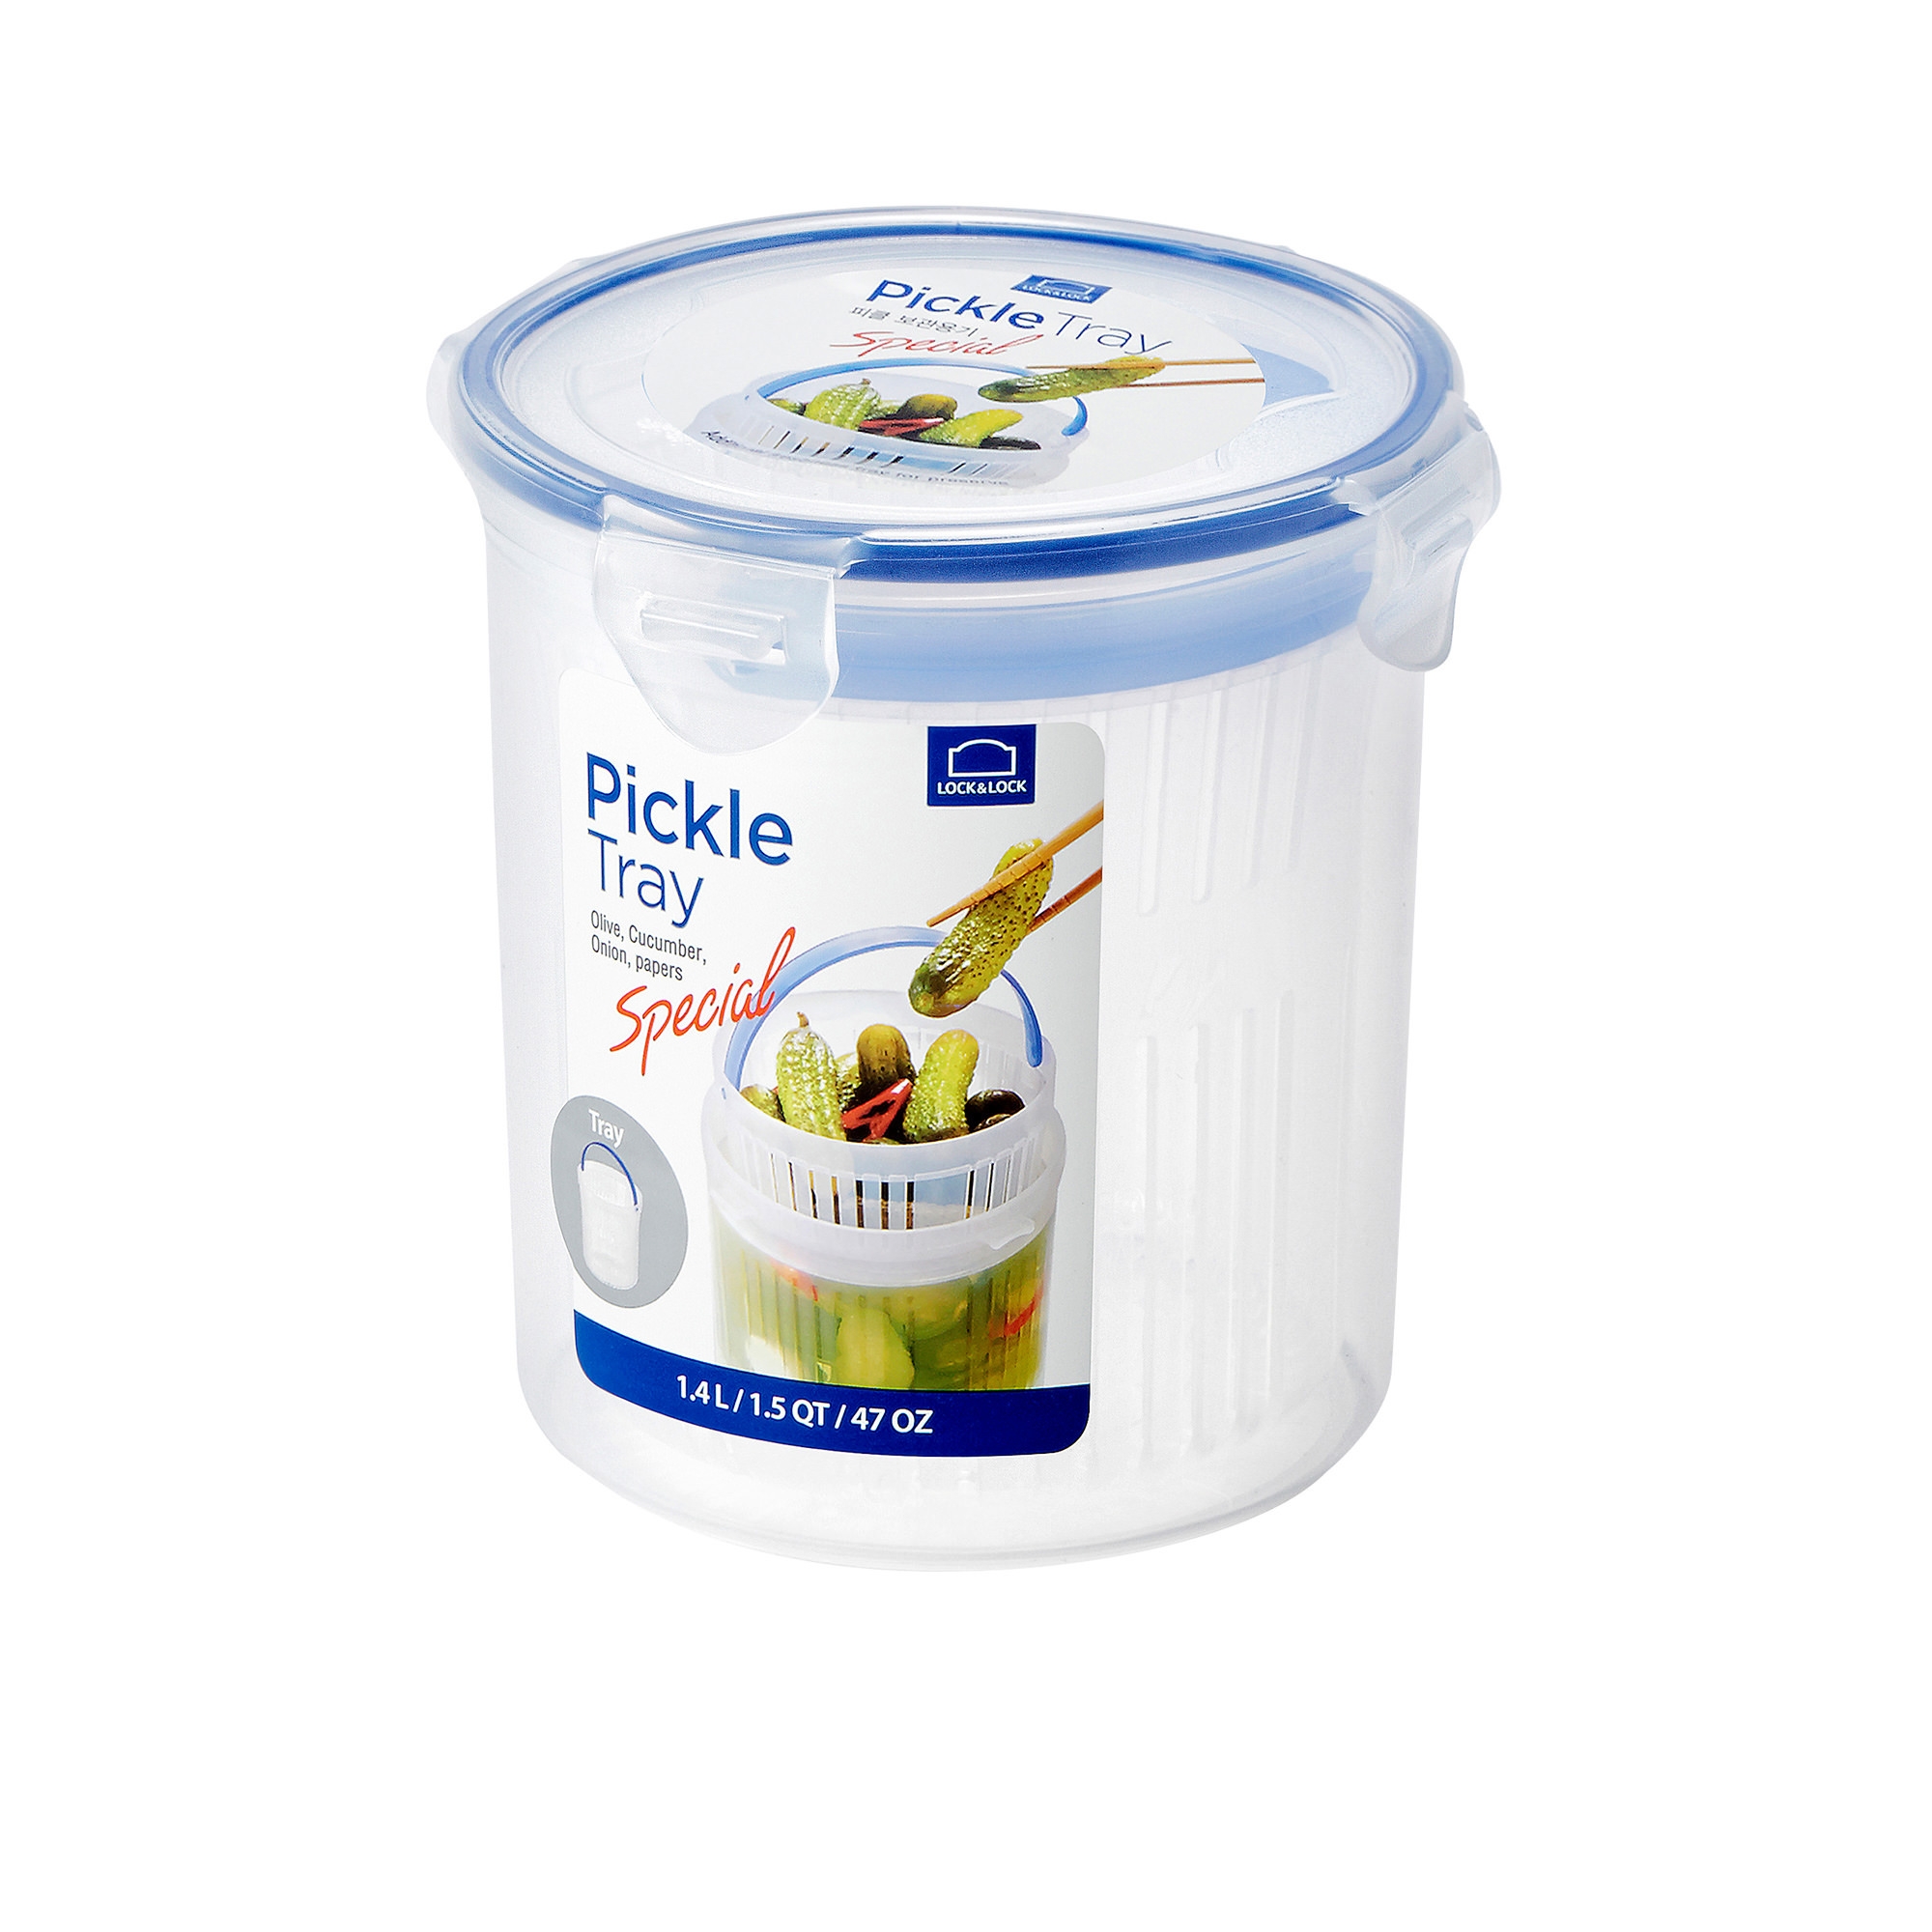 Lock & Lock Special Round Container with Draining Basket 1.4L Image 1